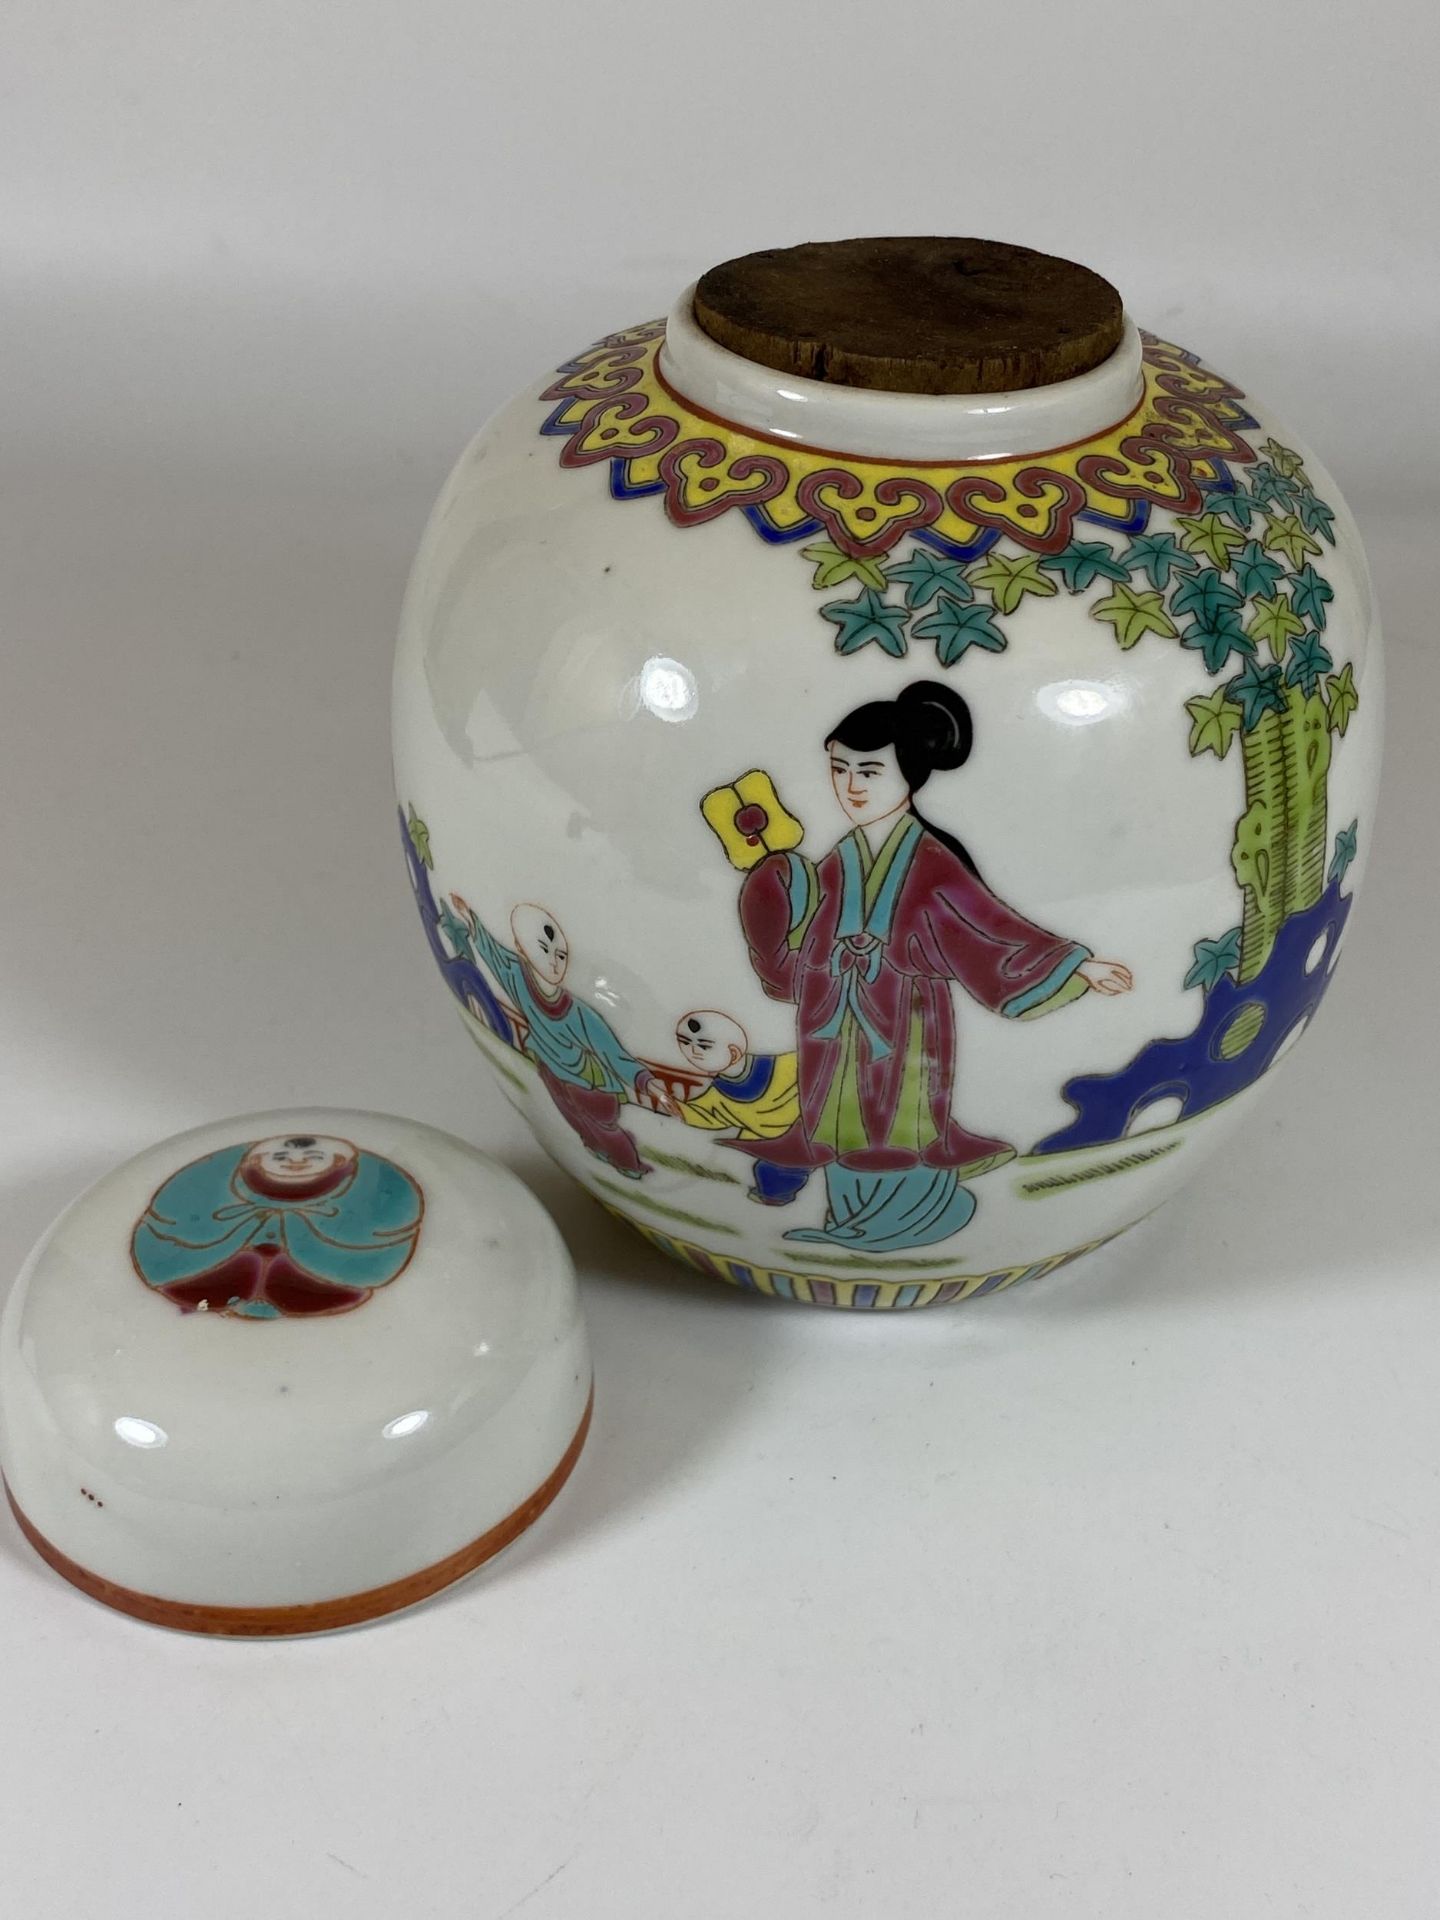 A REPUBLIC PERIOD CHINESE LIDDED GINGER JAR WITH ORIGINAL CORK SEAL, HEIGHT 11CM - Image 3 of 4